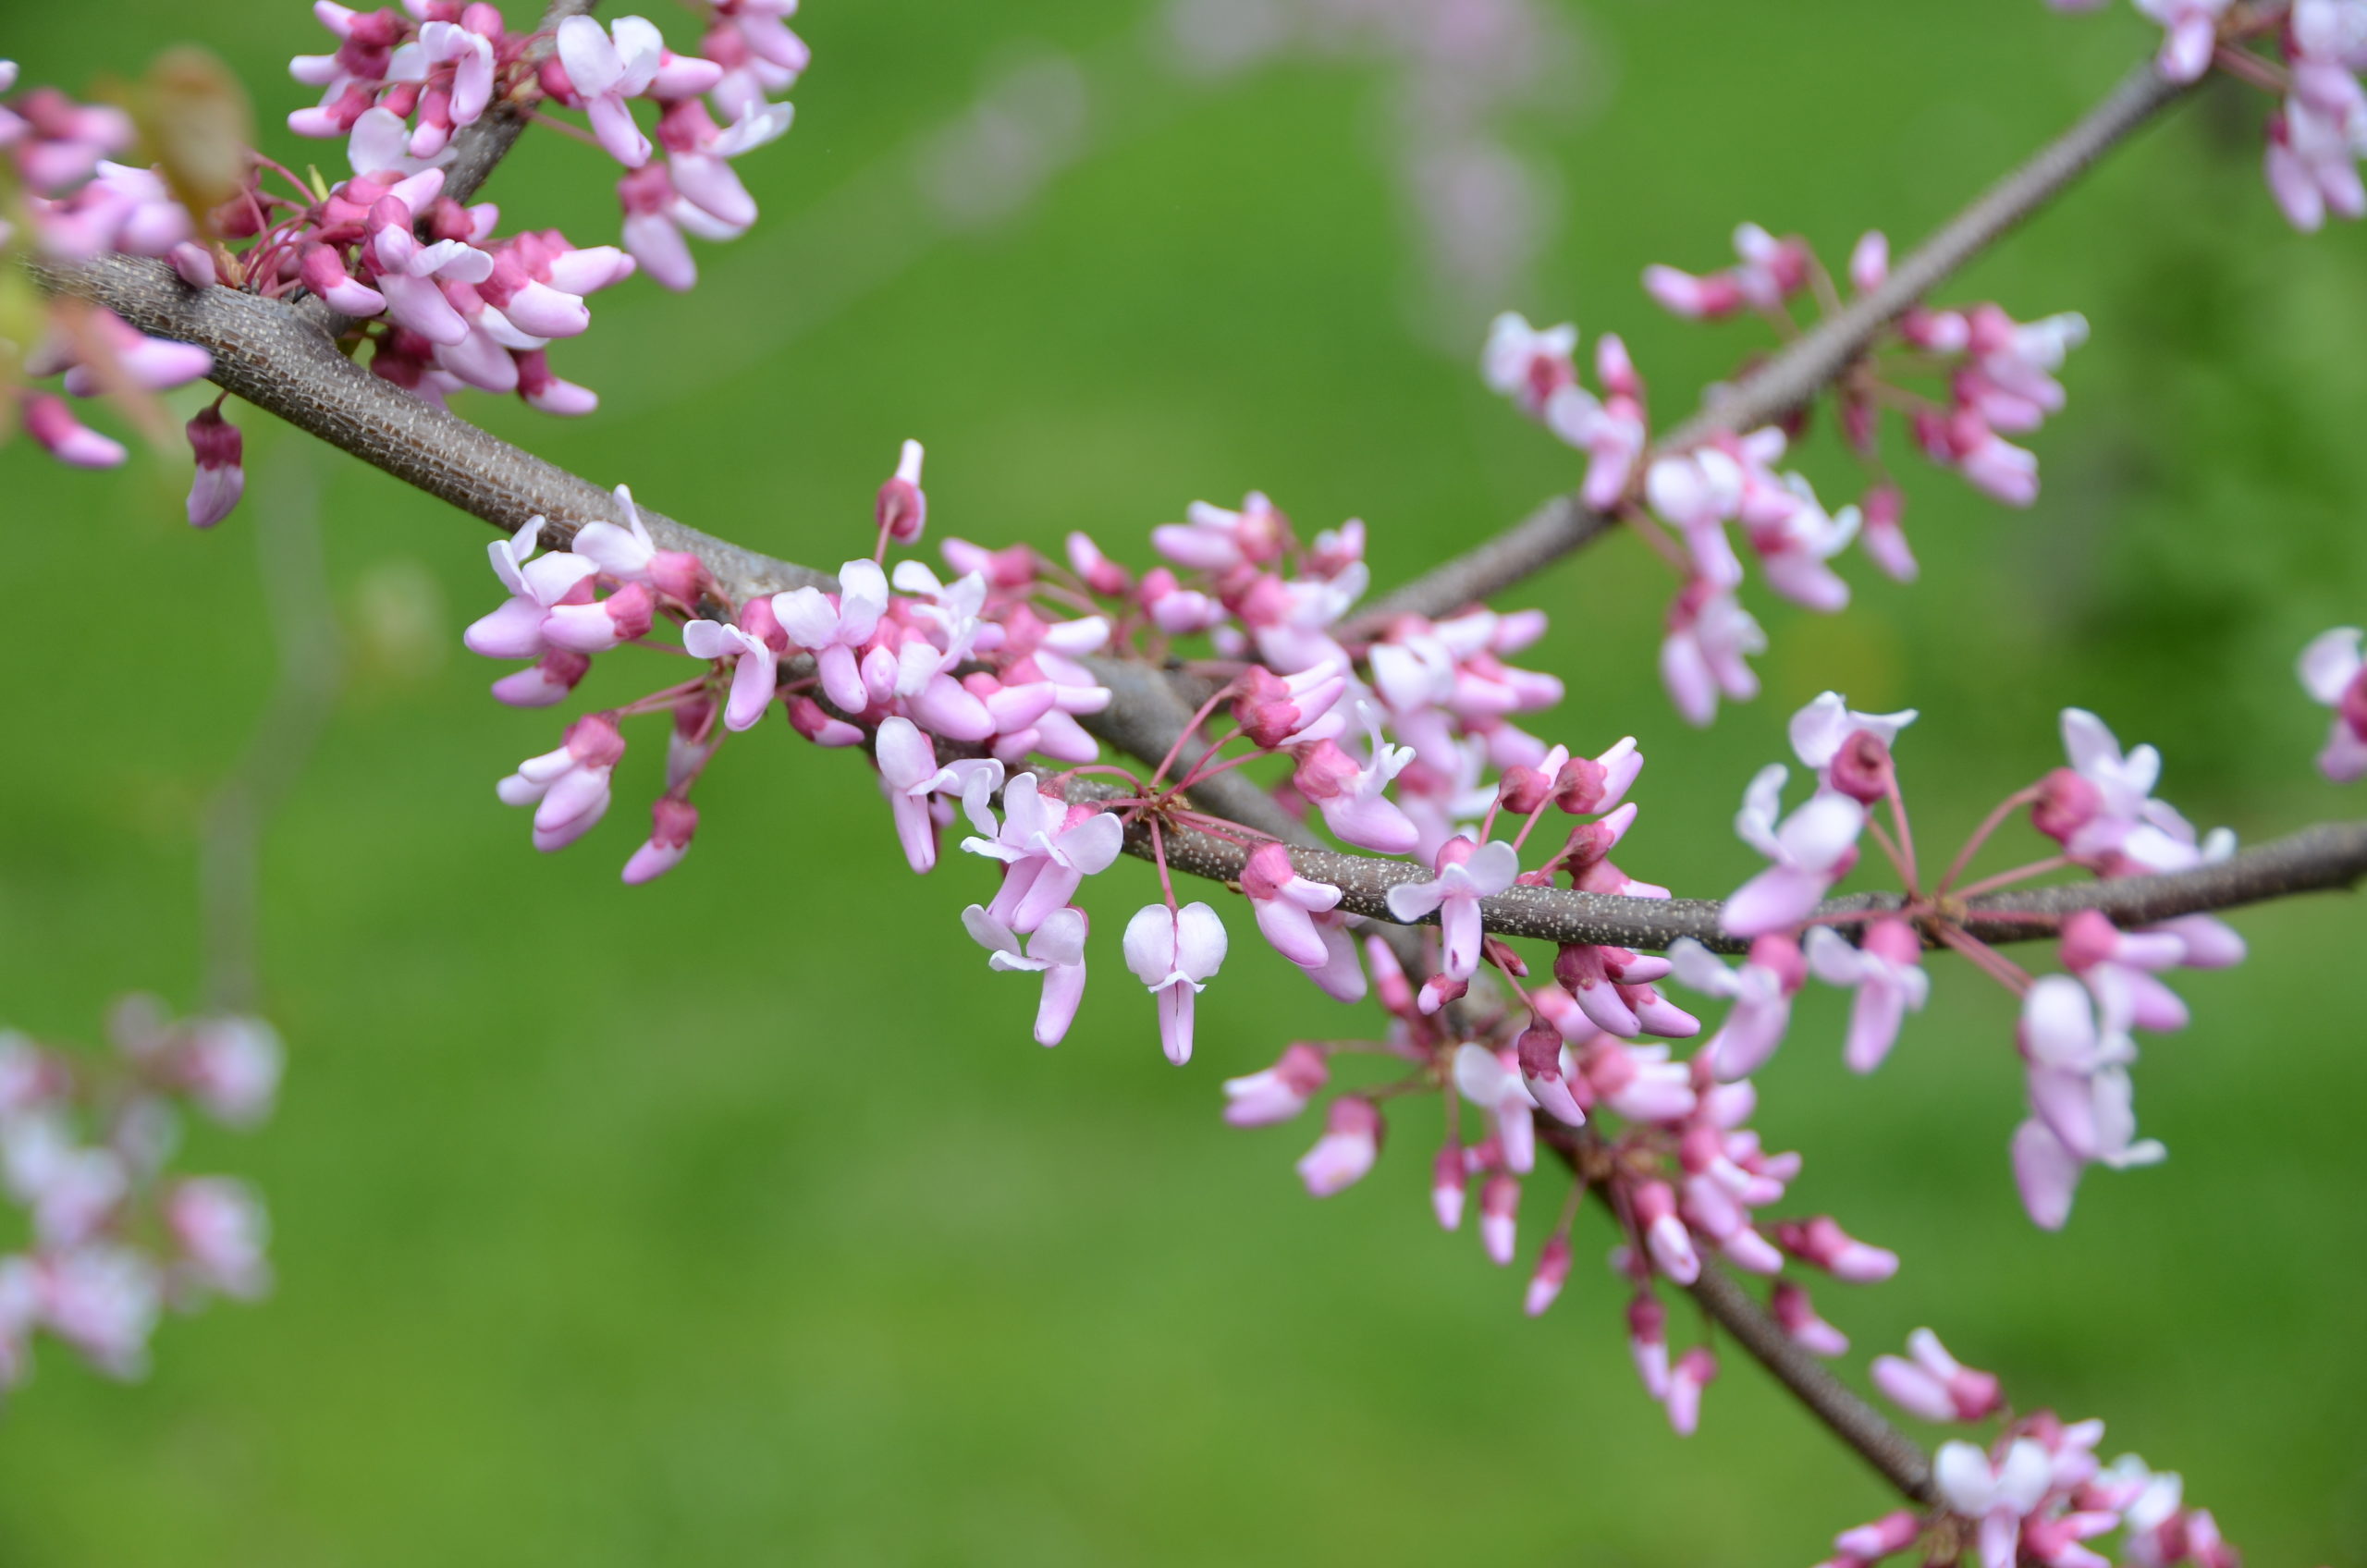 Redbuds (Cercis canadensis) as well as flowering almonds (Prunus triloba) can provide long branch cuttings with colors ranging from pinks in the redbuds to darker and more fragrant flowers in the flowering almonds.